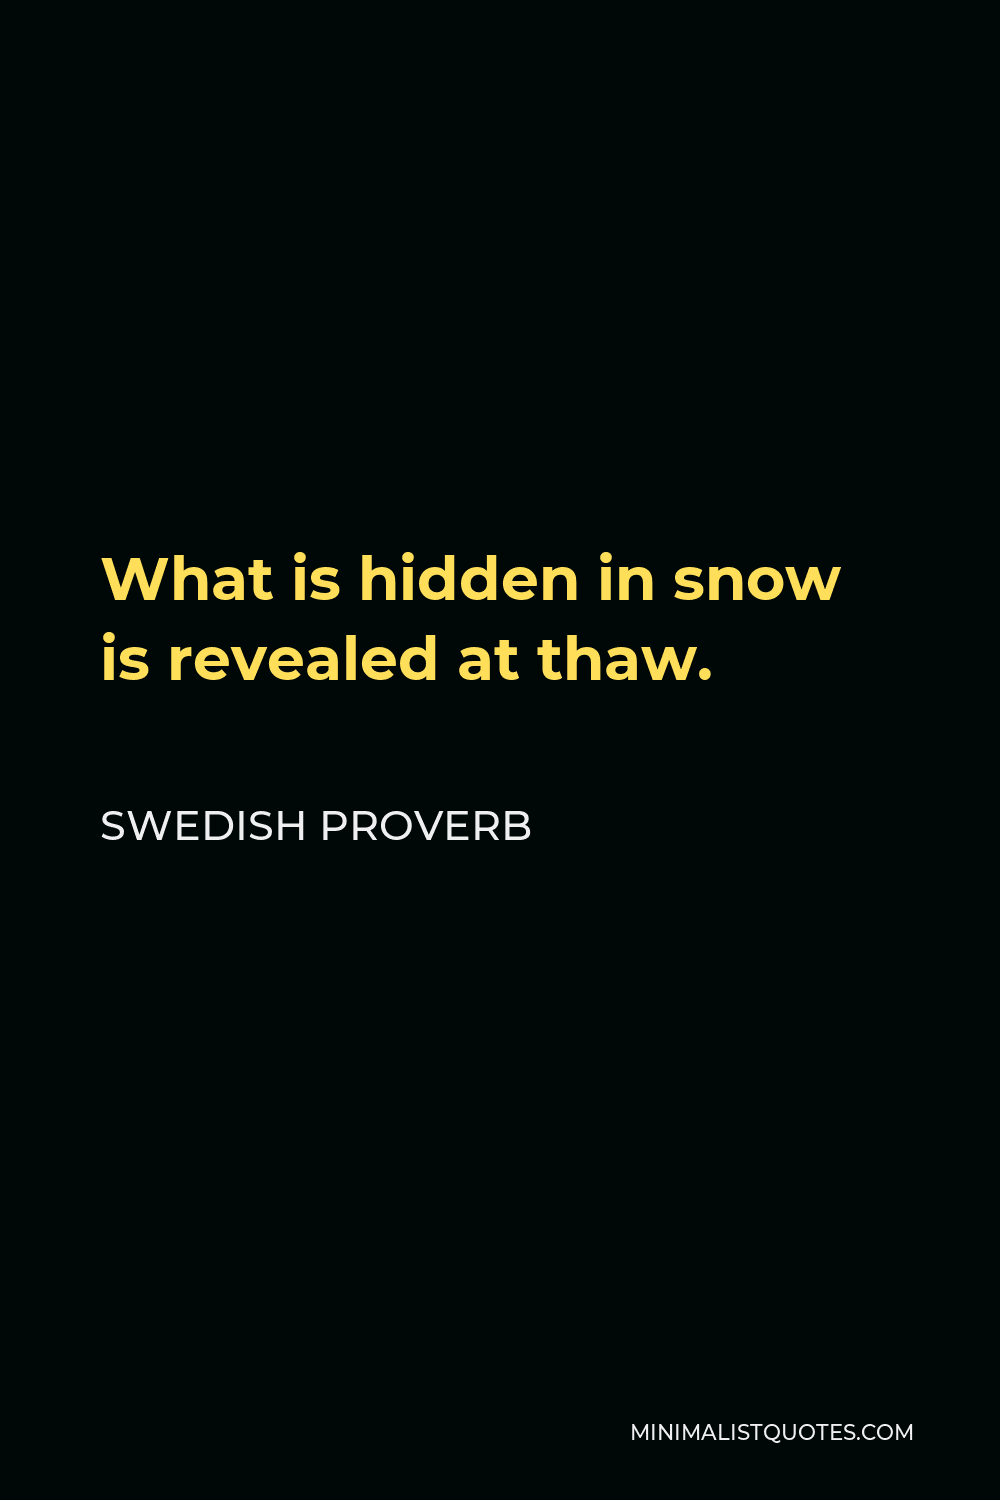 Swedish Proverb Quote - What is hidden in snow is revealed at thaw.